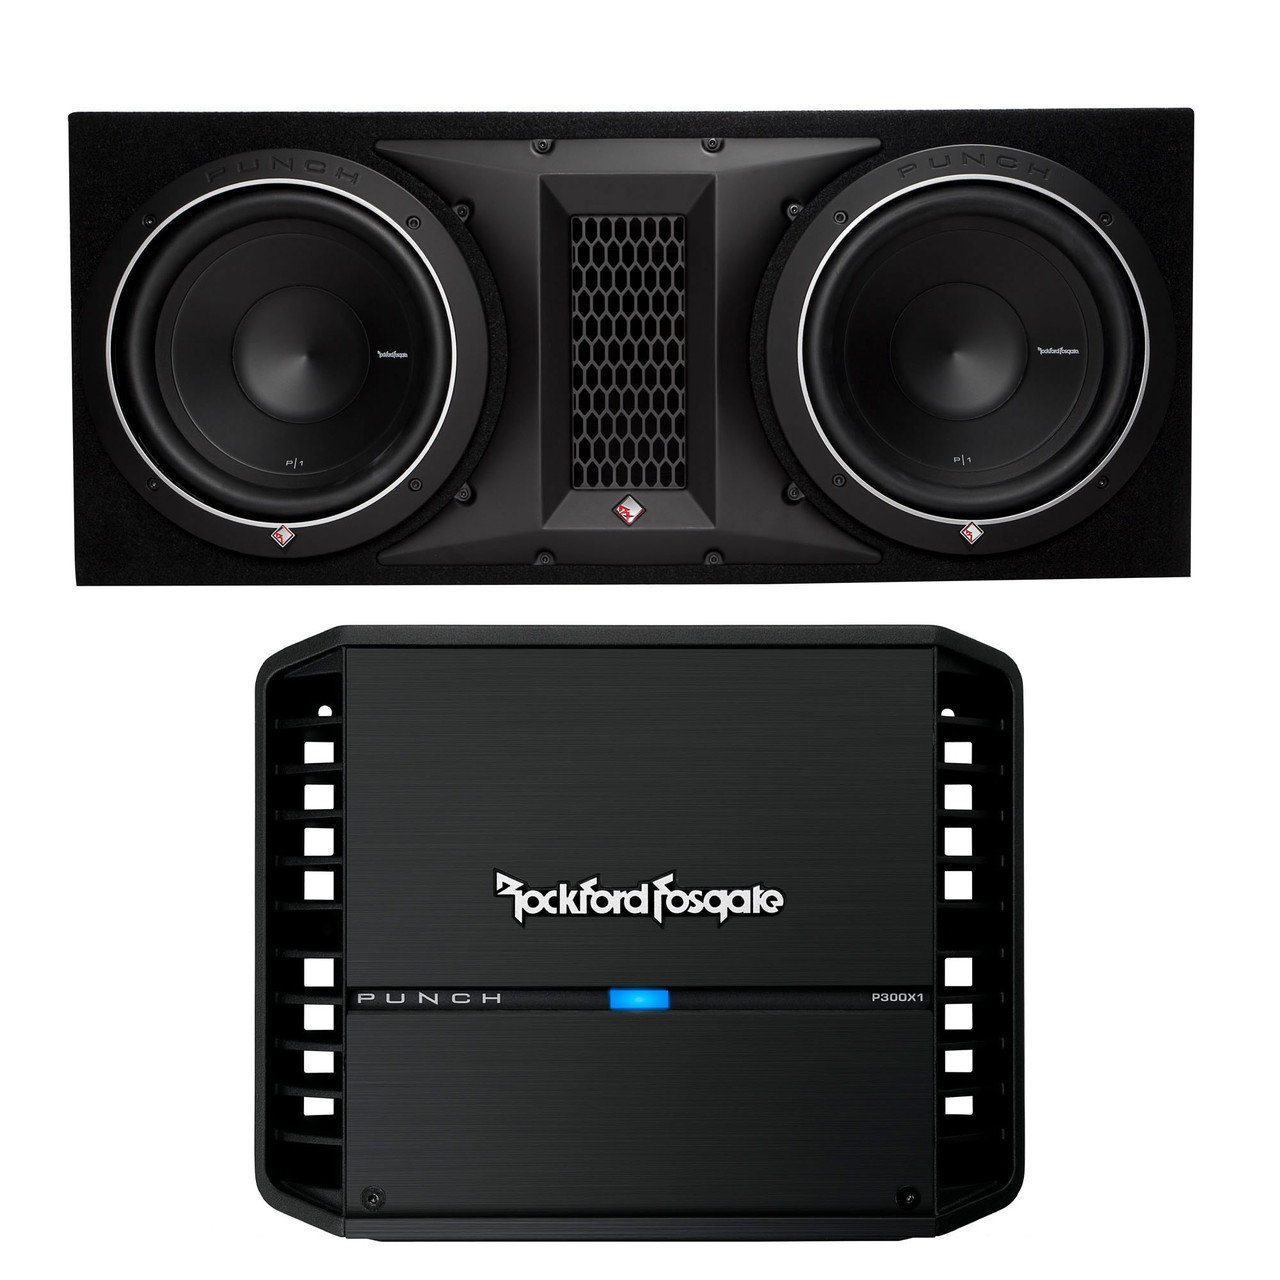 Rockford Fosgate - Two Punch P1 12" Subwoofers in a Ported Enclosure with a  Punch Series P300X1 Amplifier - Creative Audio